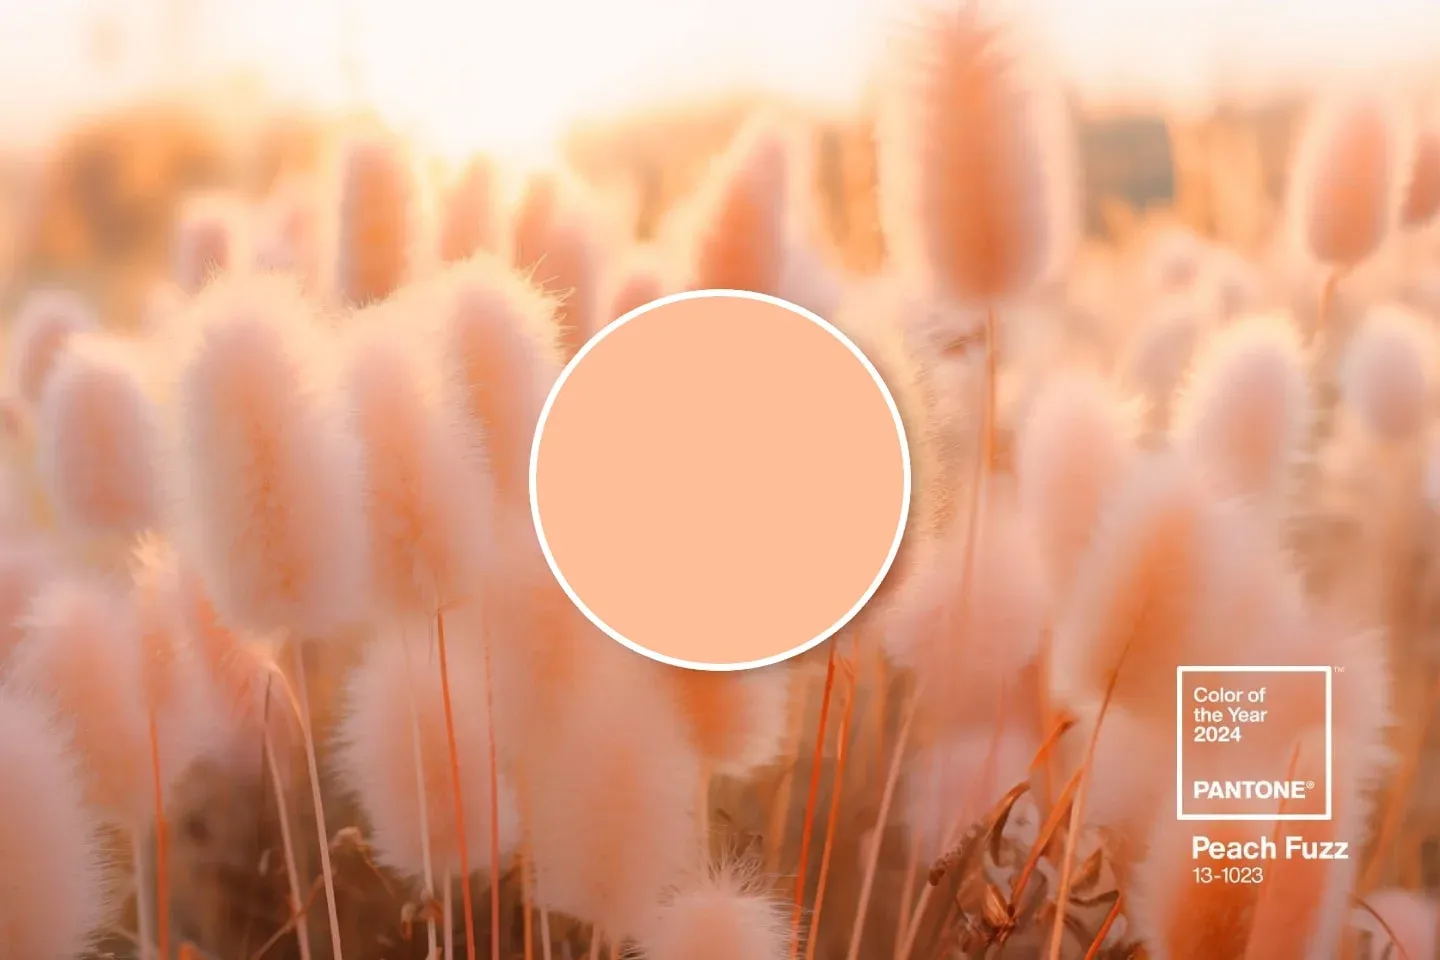 Pantone 13-1023 Peach Fuzz captures our desire to nurture ourselves and others. It's a velvety gentle peach tone whose all-embracing spirit enriches mind, body, and soul - Pantone